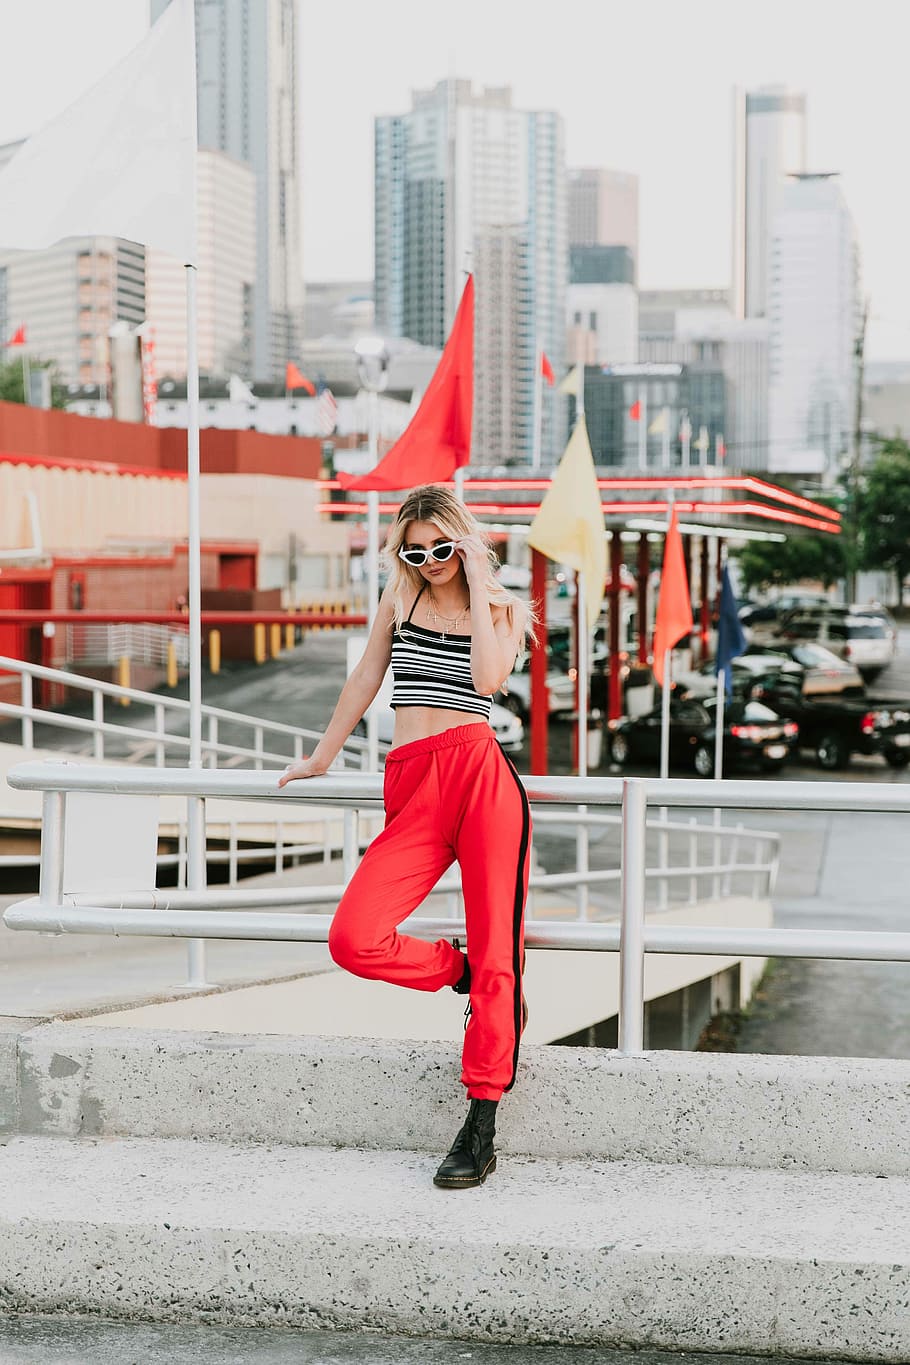 Women's Black Tank Top And Red Track Pants Walking On Street